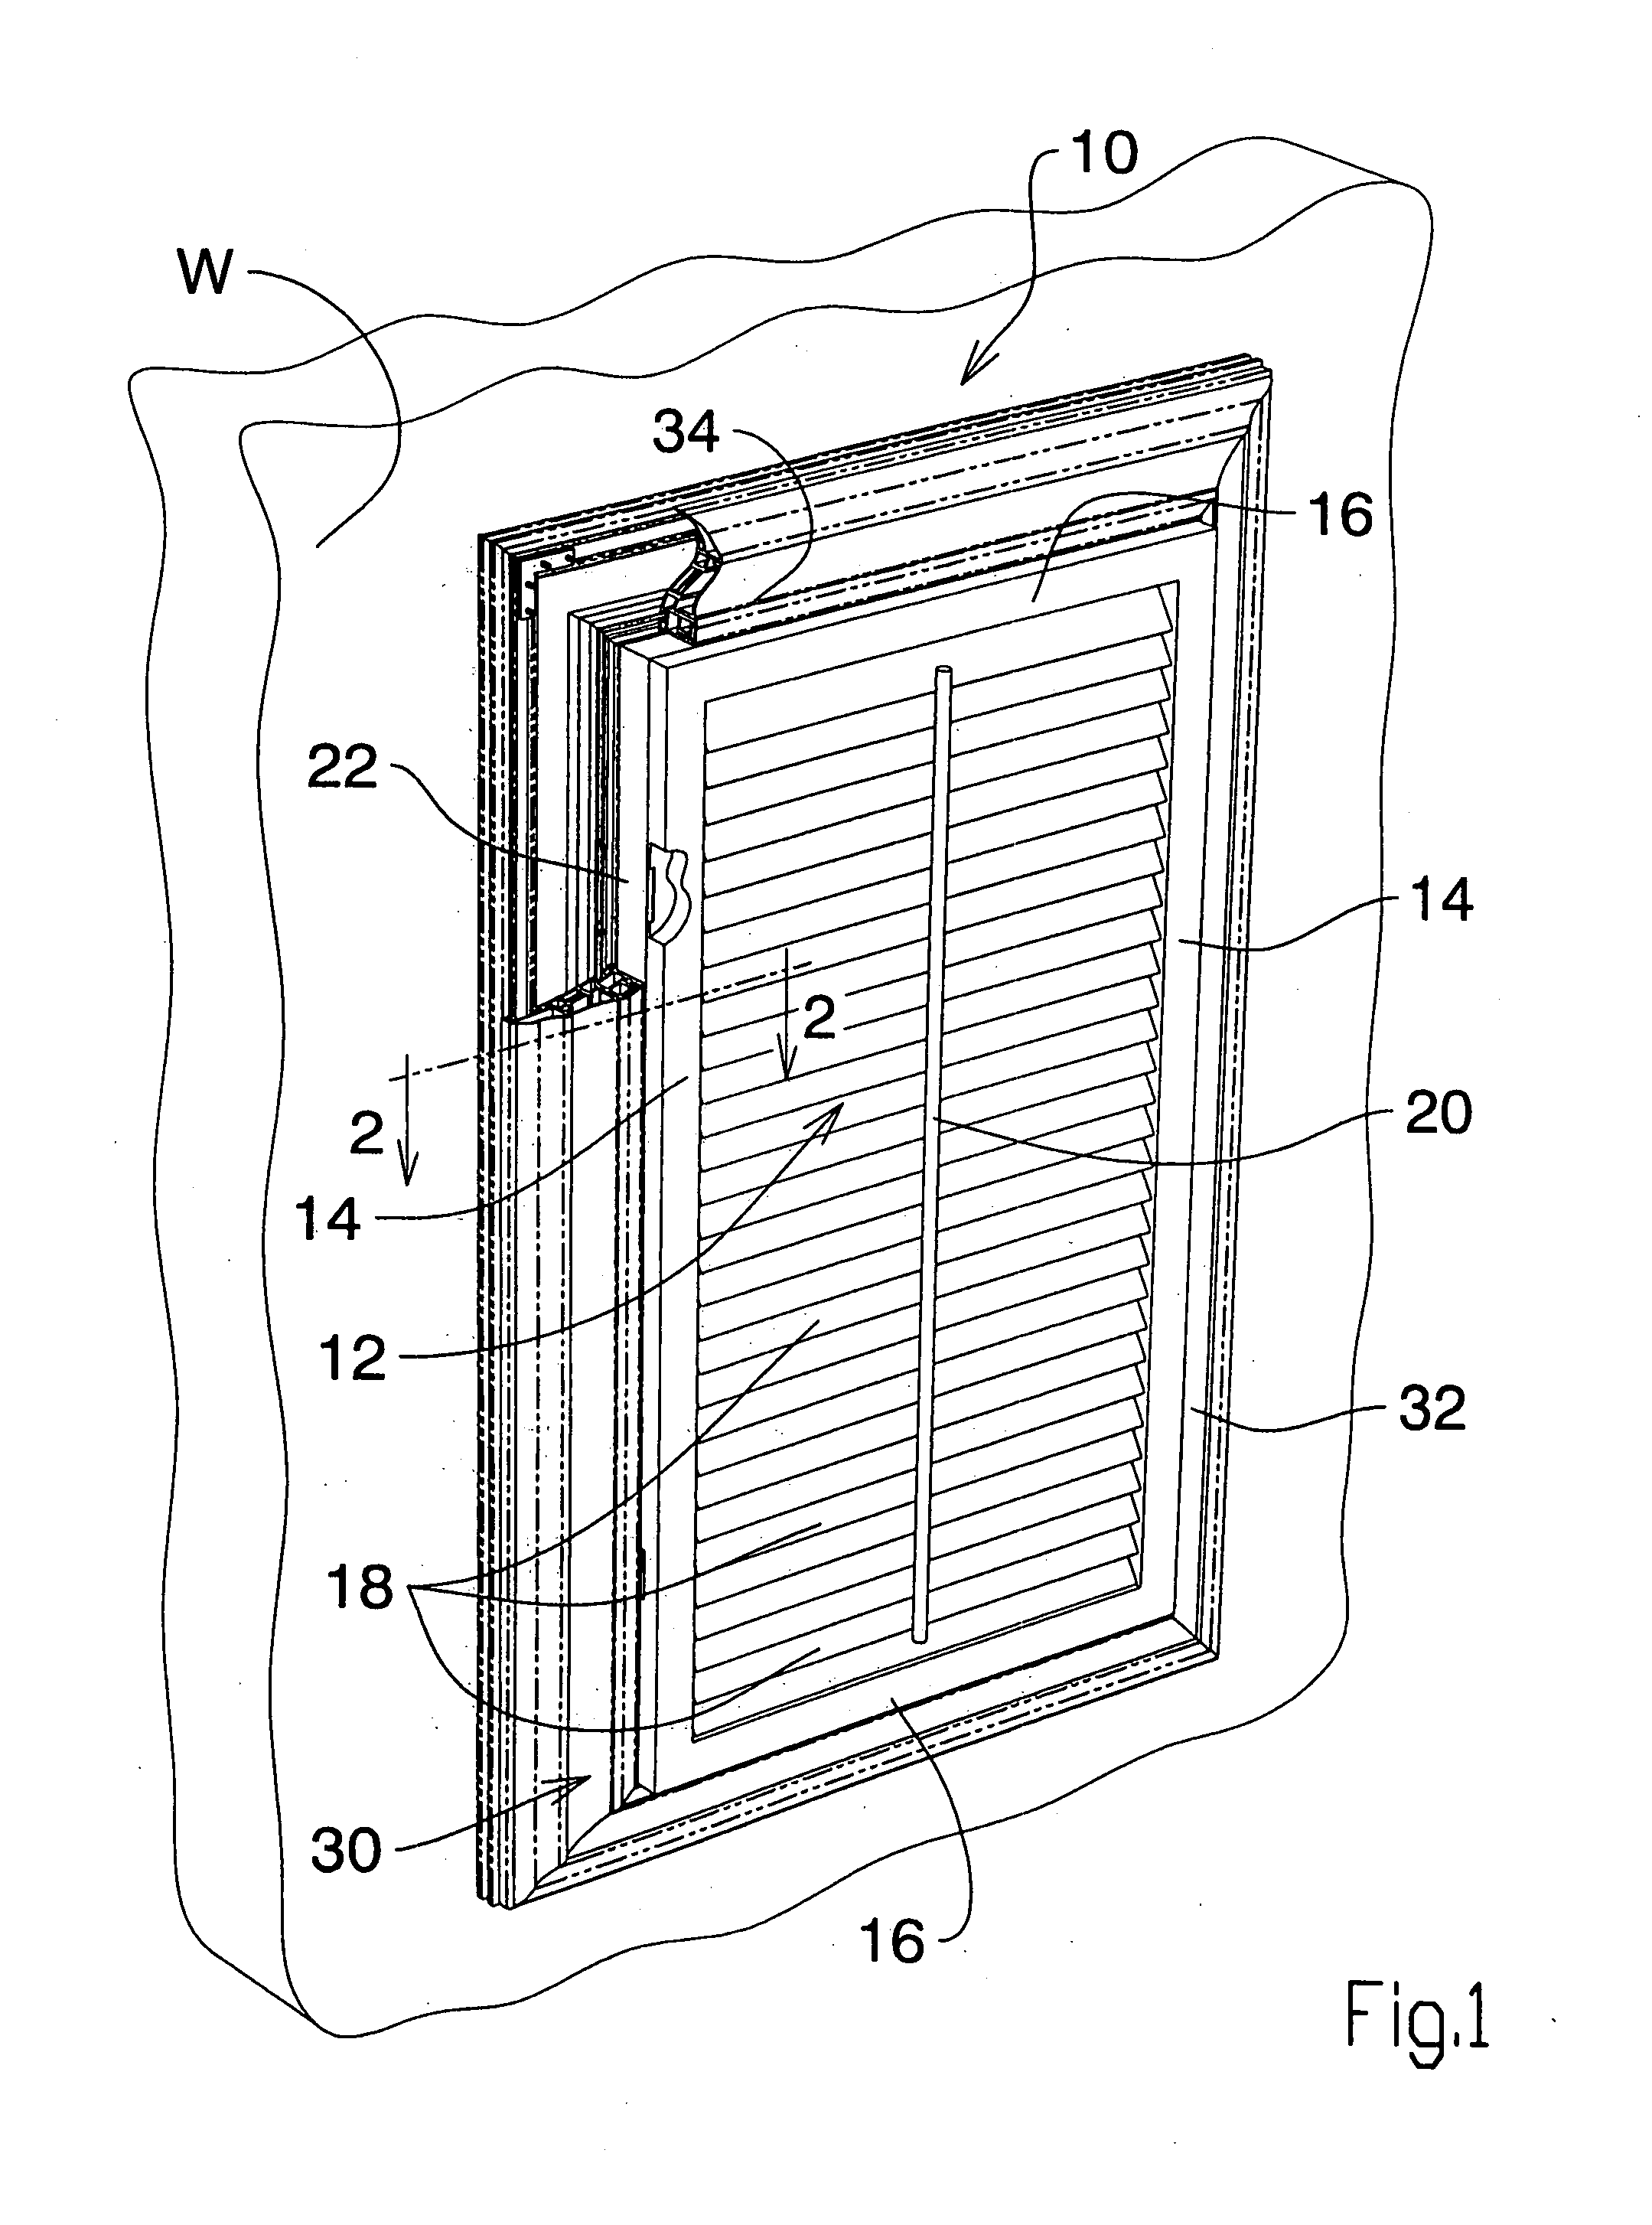 Shutter border frame with channel and cover plug